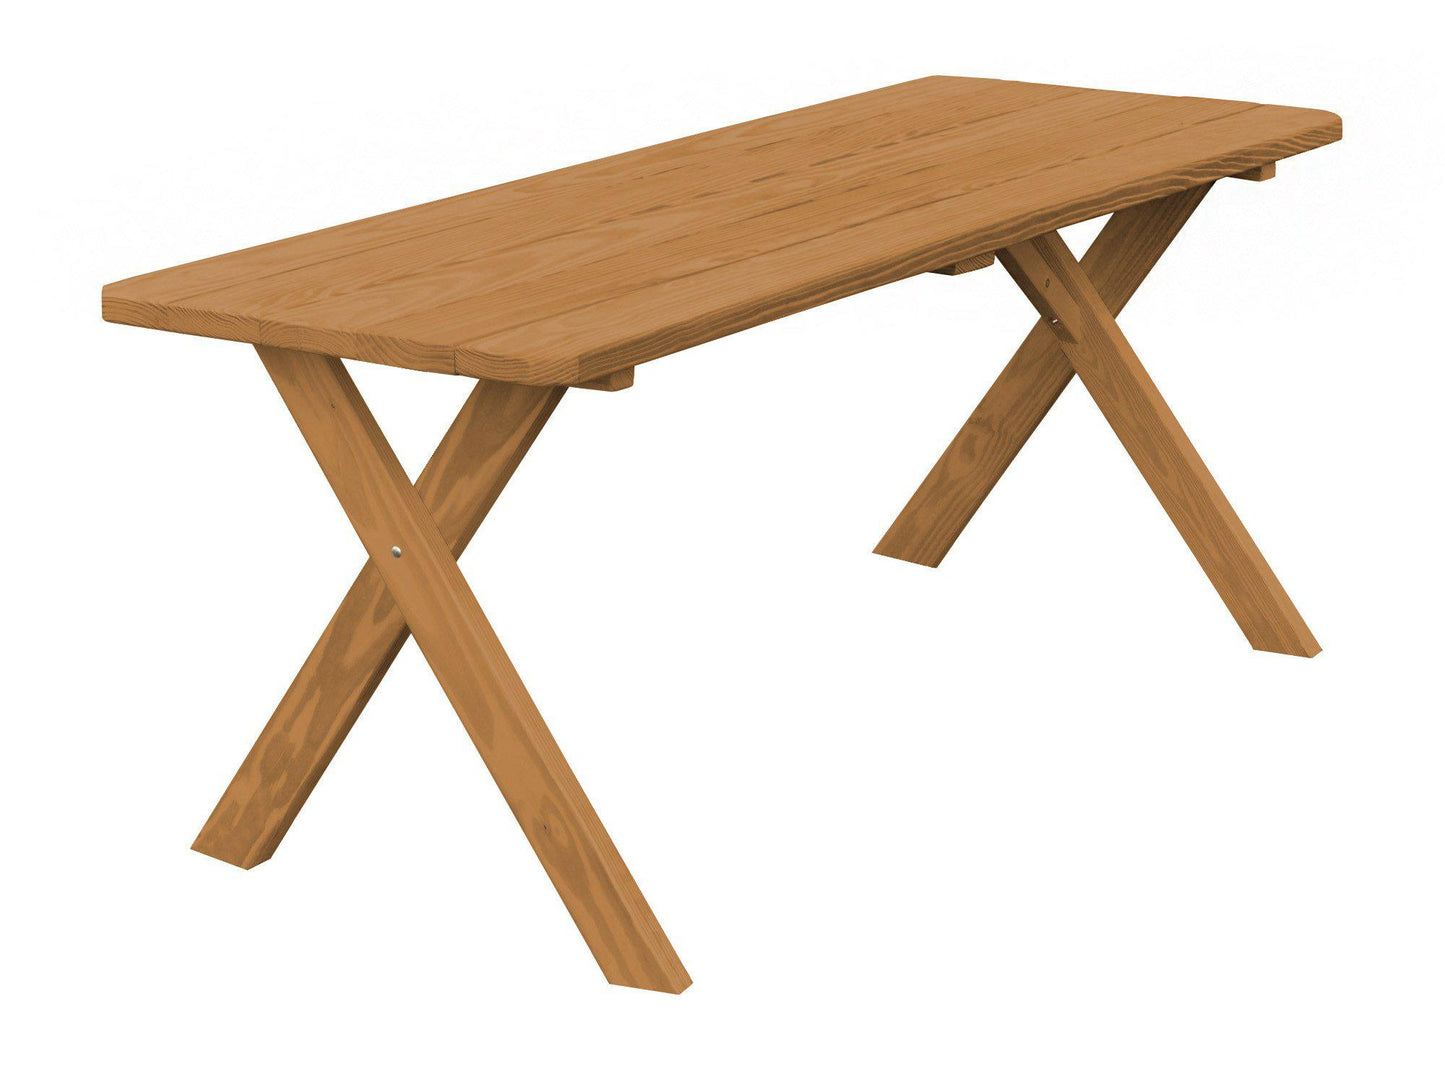 A&L Furniture Co. Pressure Treated Pine 8' Cross-leg Table Only - LEAD TIME TO SHIP 10 BUSINESS DAYS